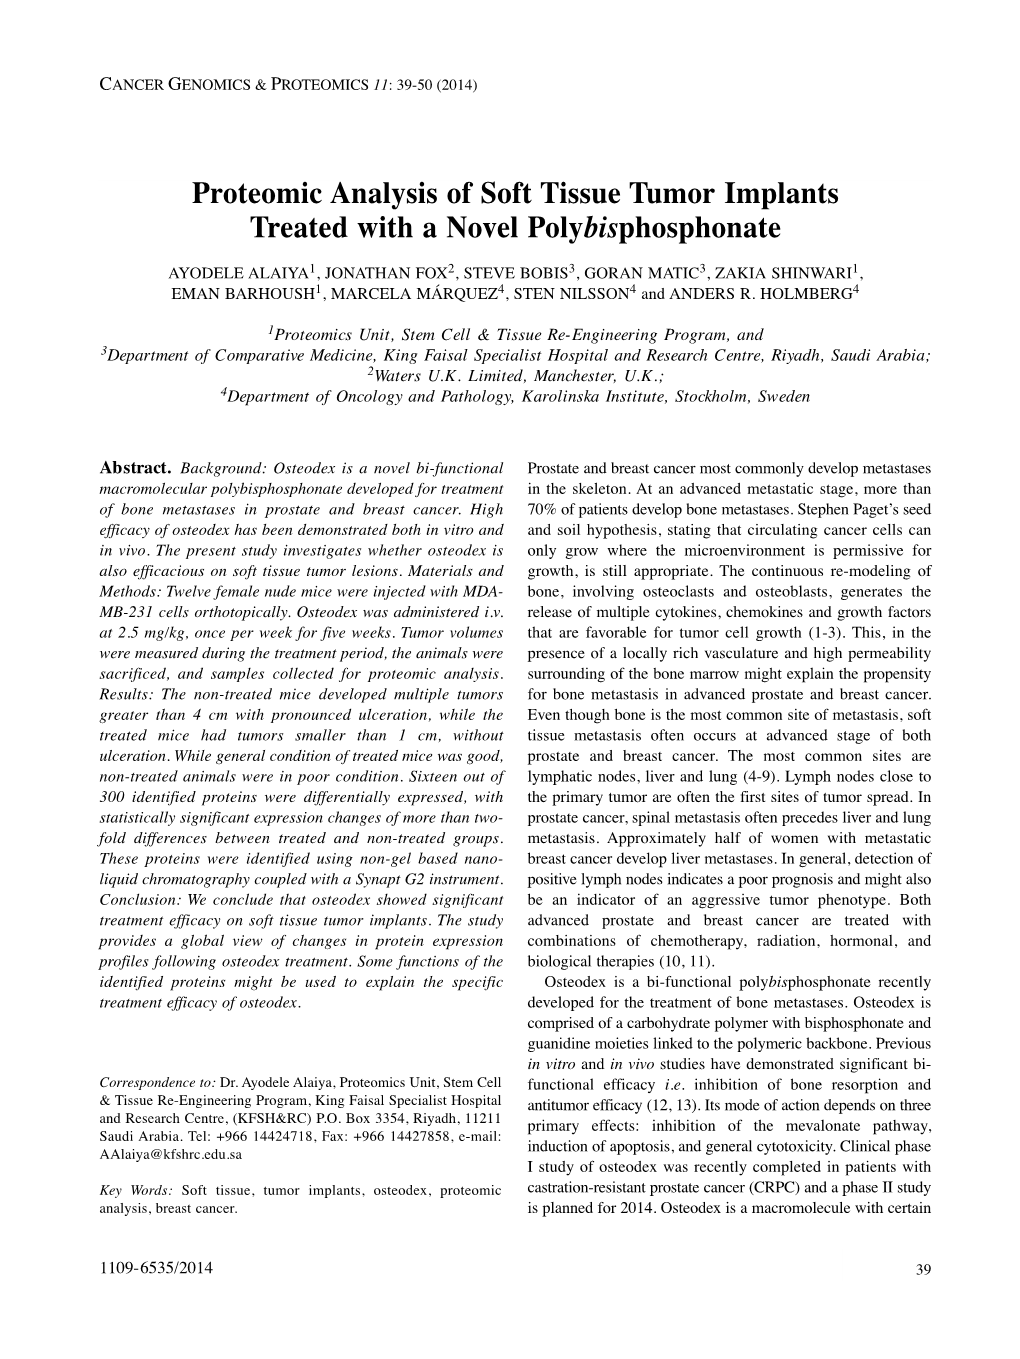 Proteomic Analysis of Soft Tissue Tumor Implants Treated with A